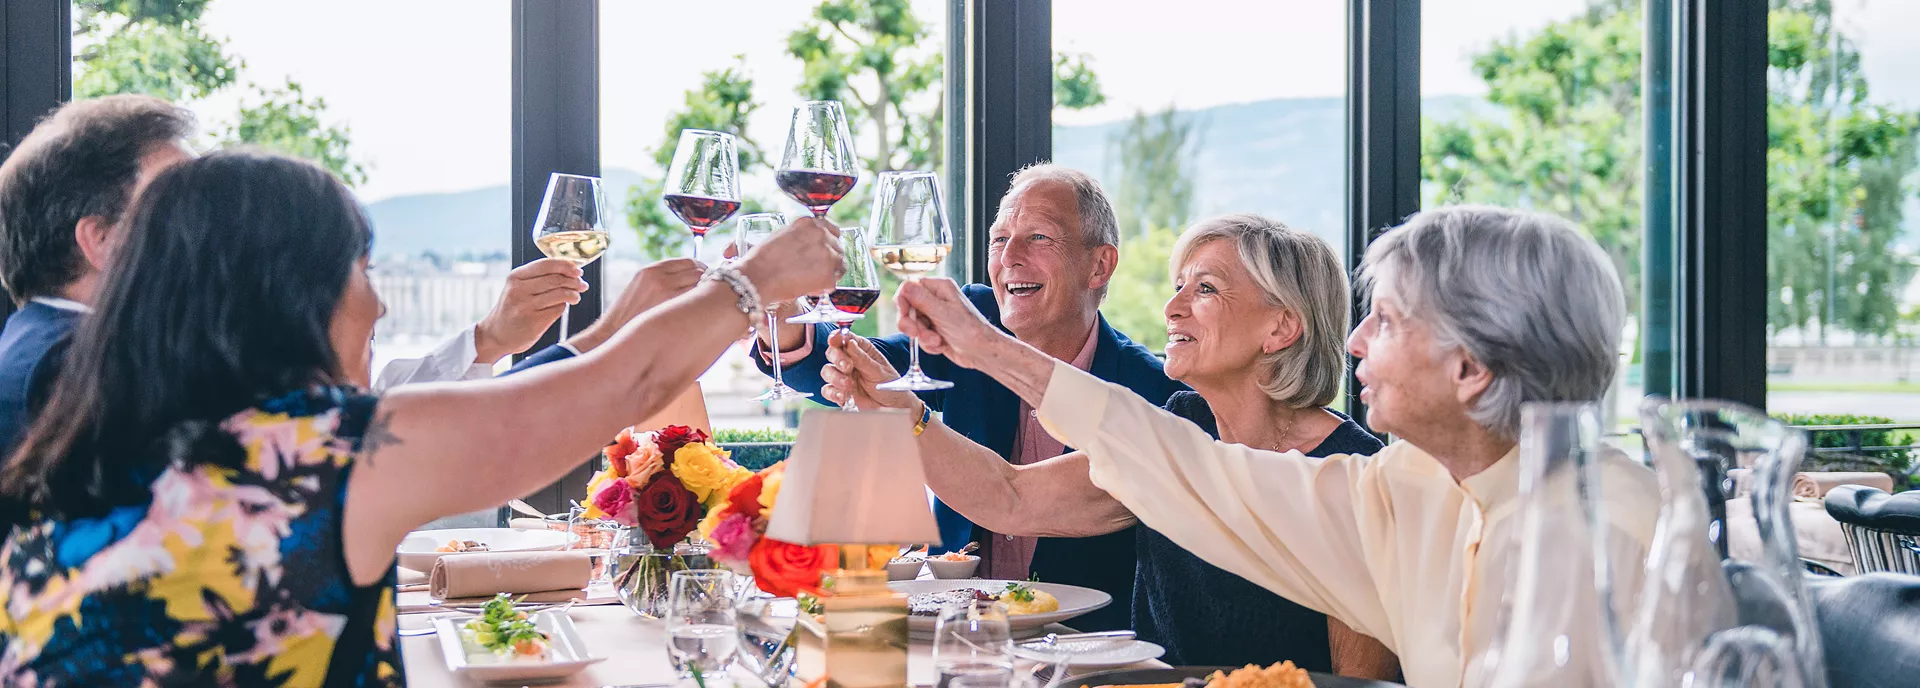 A group of people raising a toast while dining together